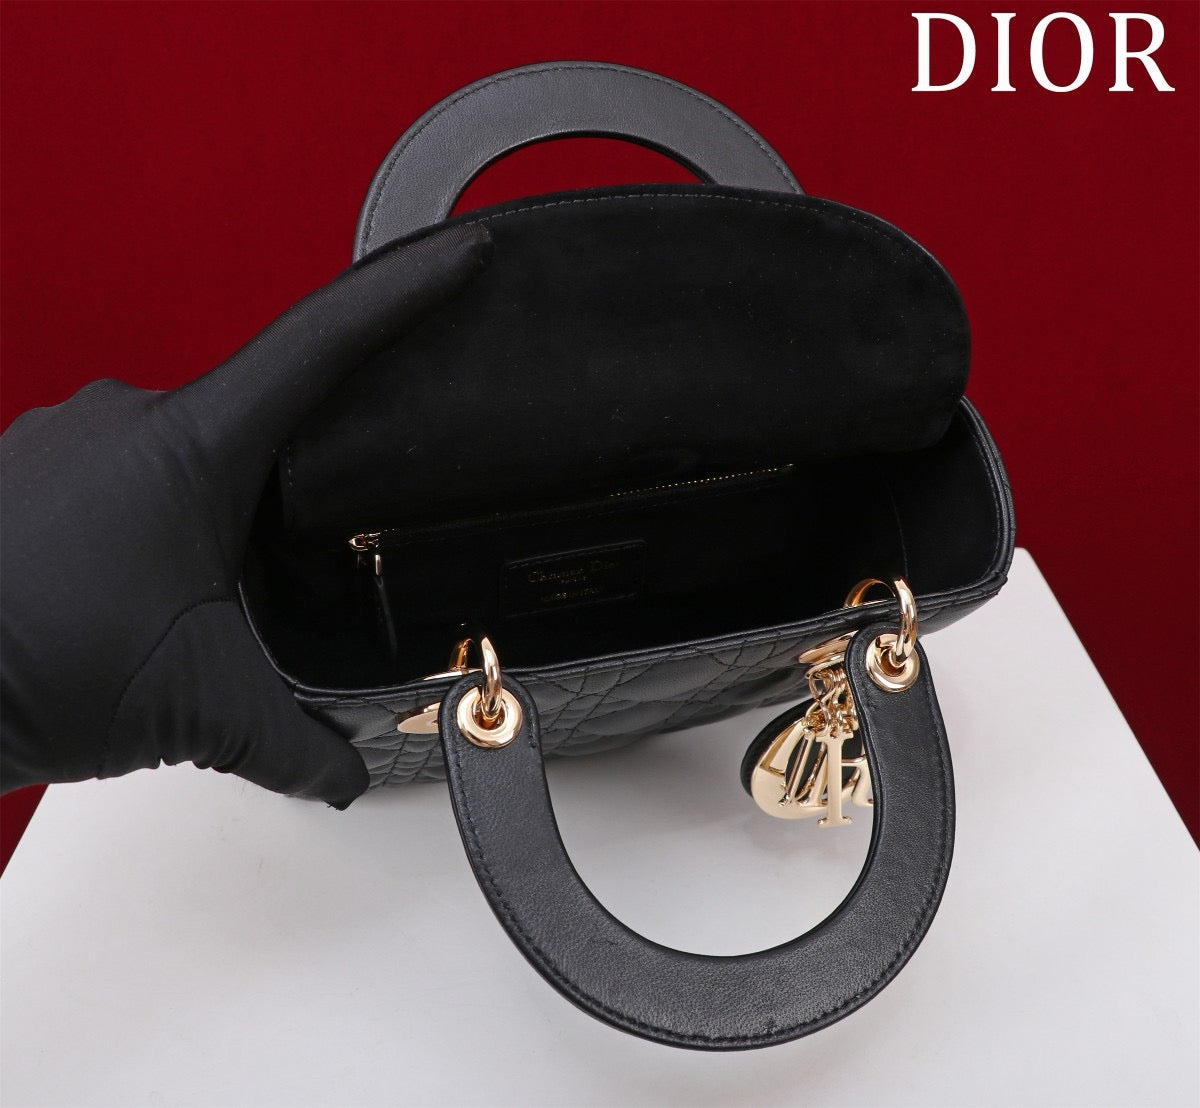 opening of lady dior bag